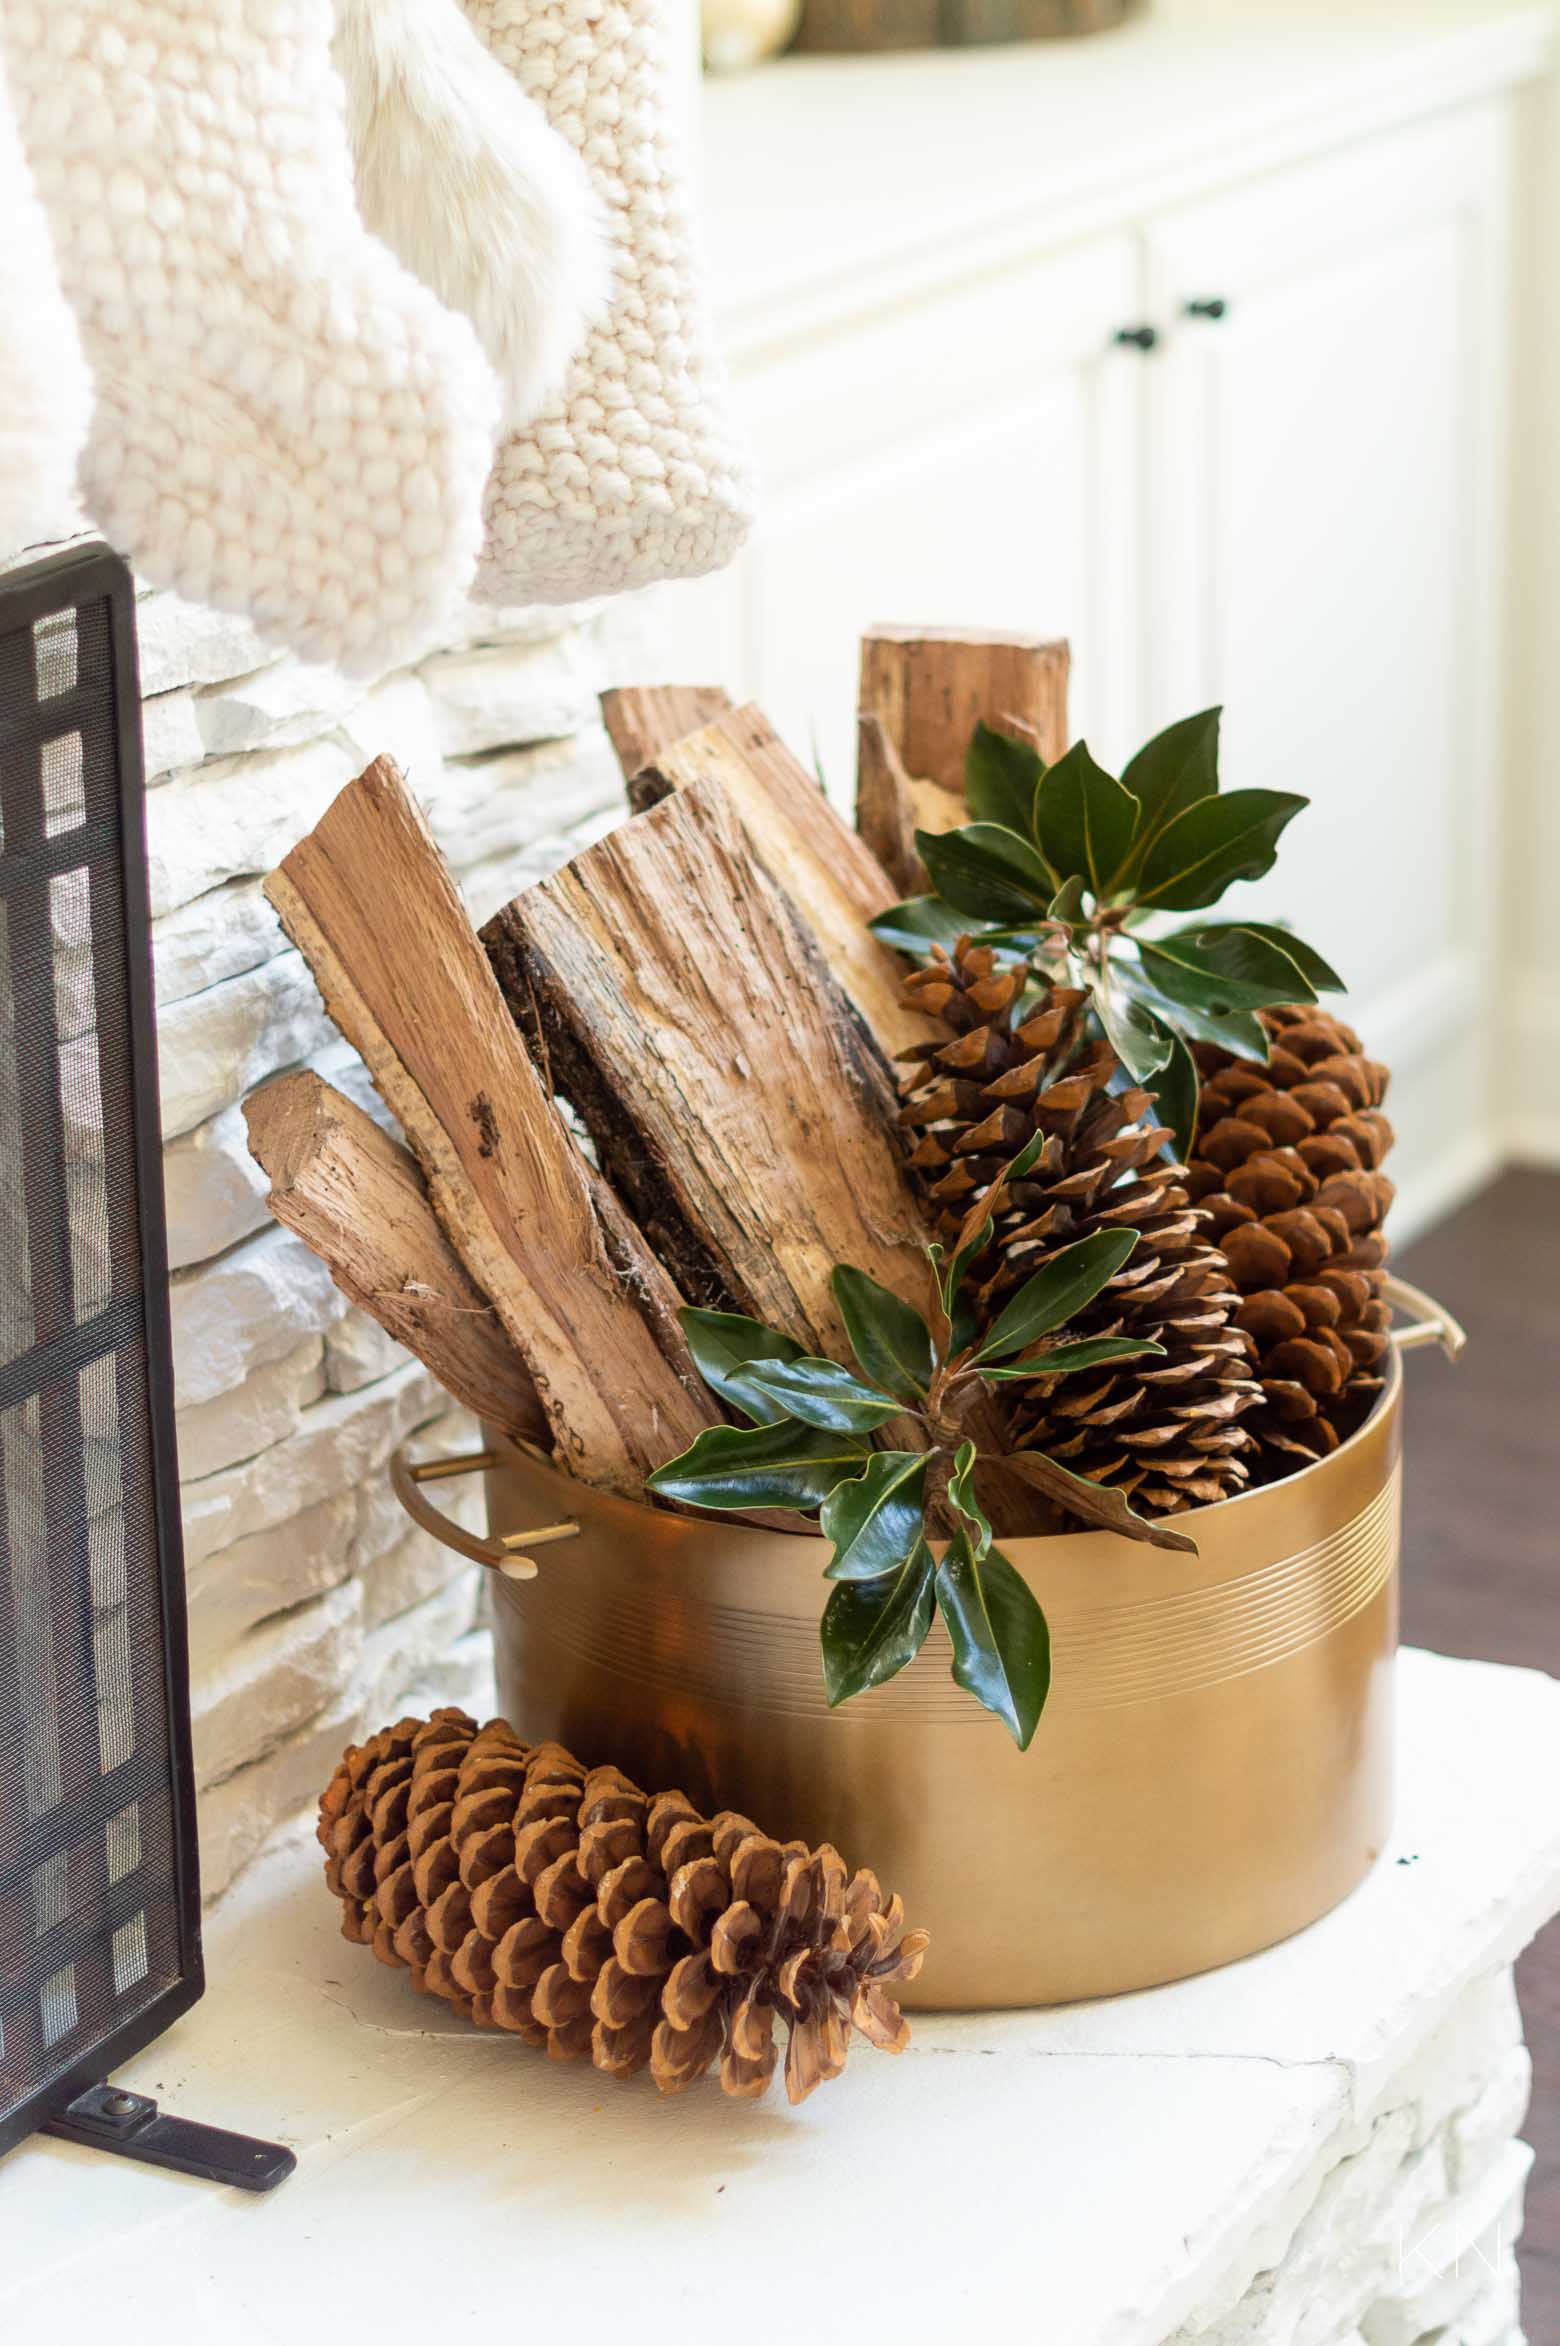 Fireplace Hearth Christmas Decor with Logs